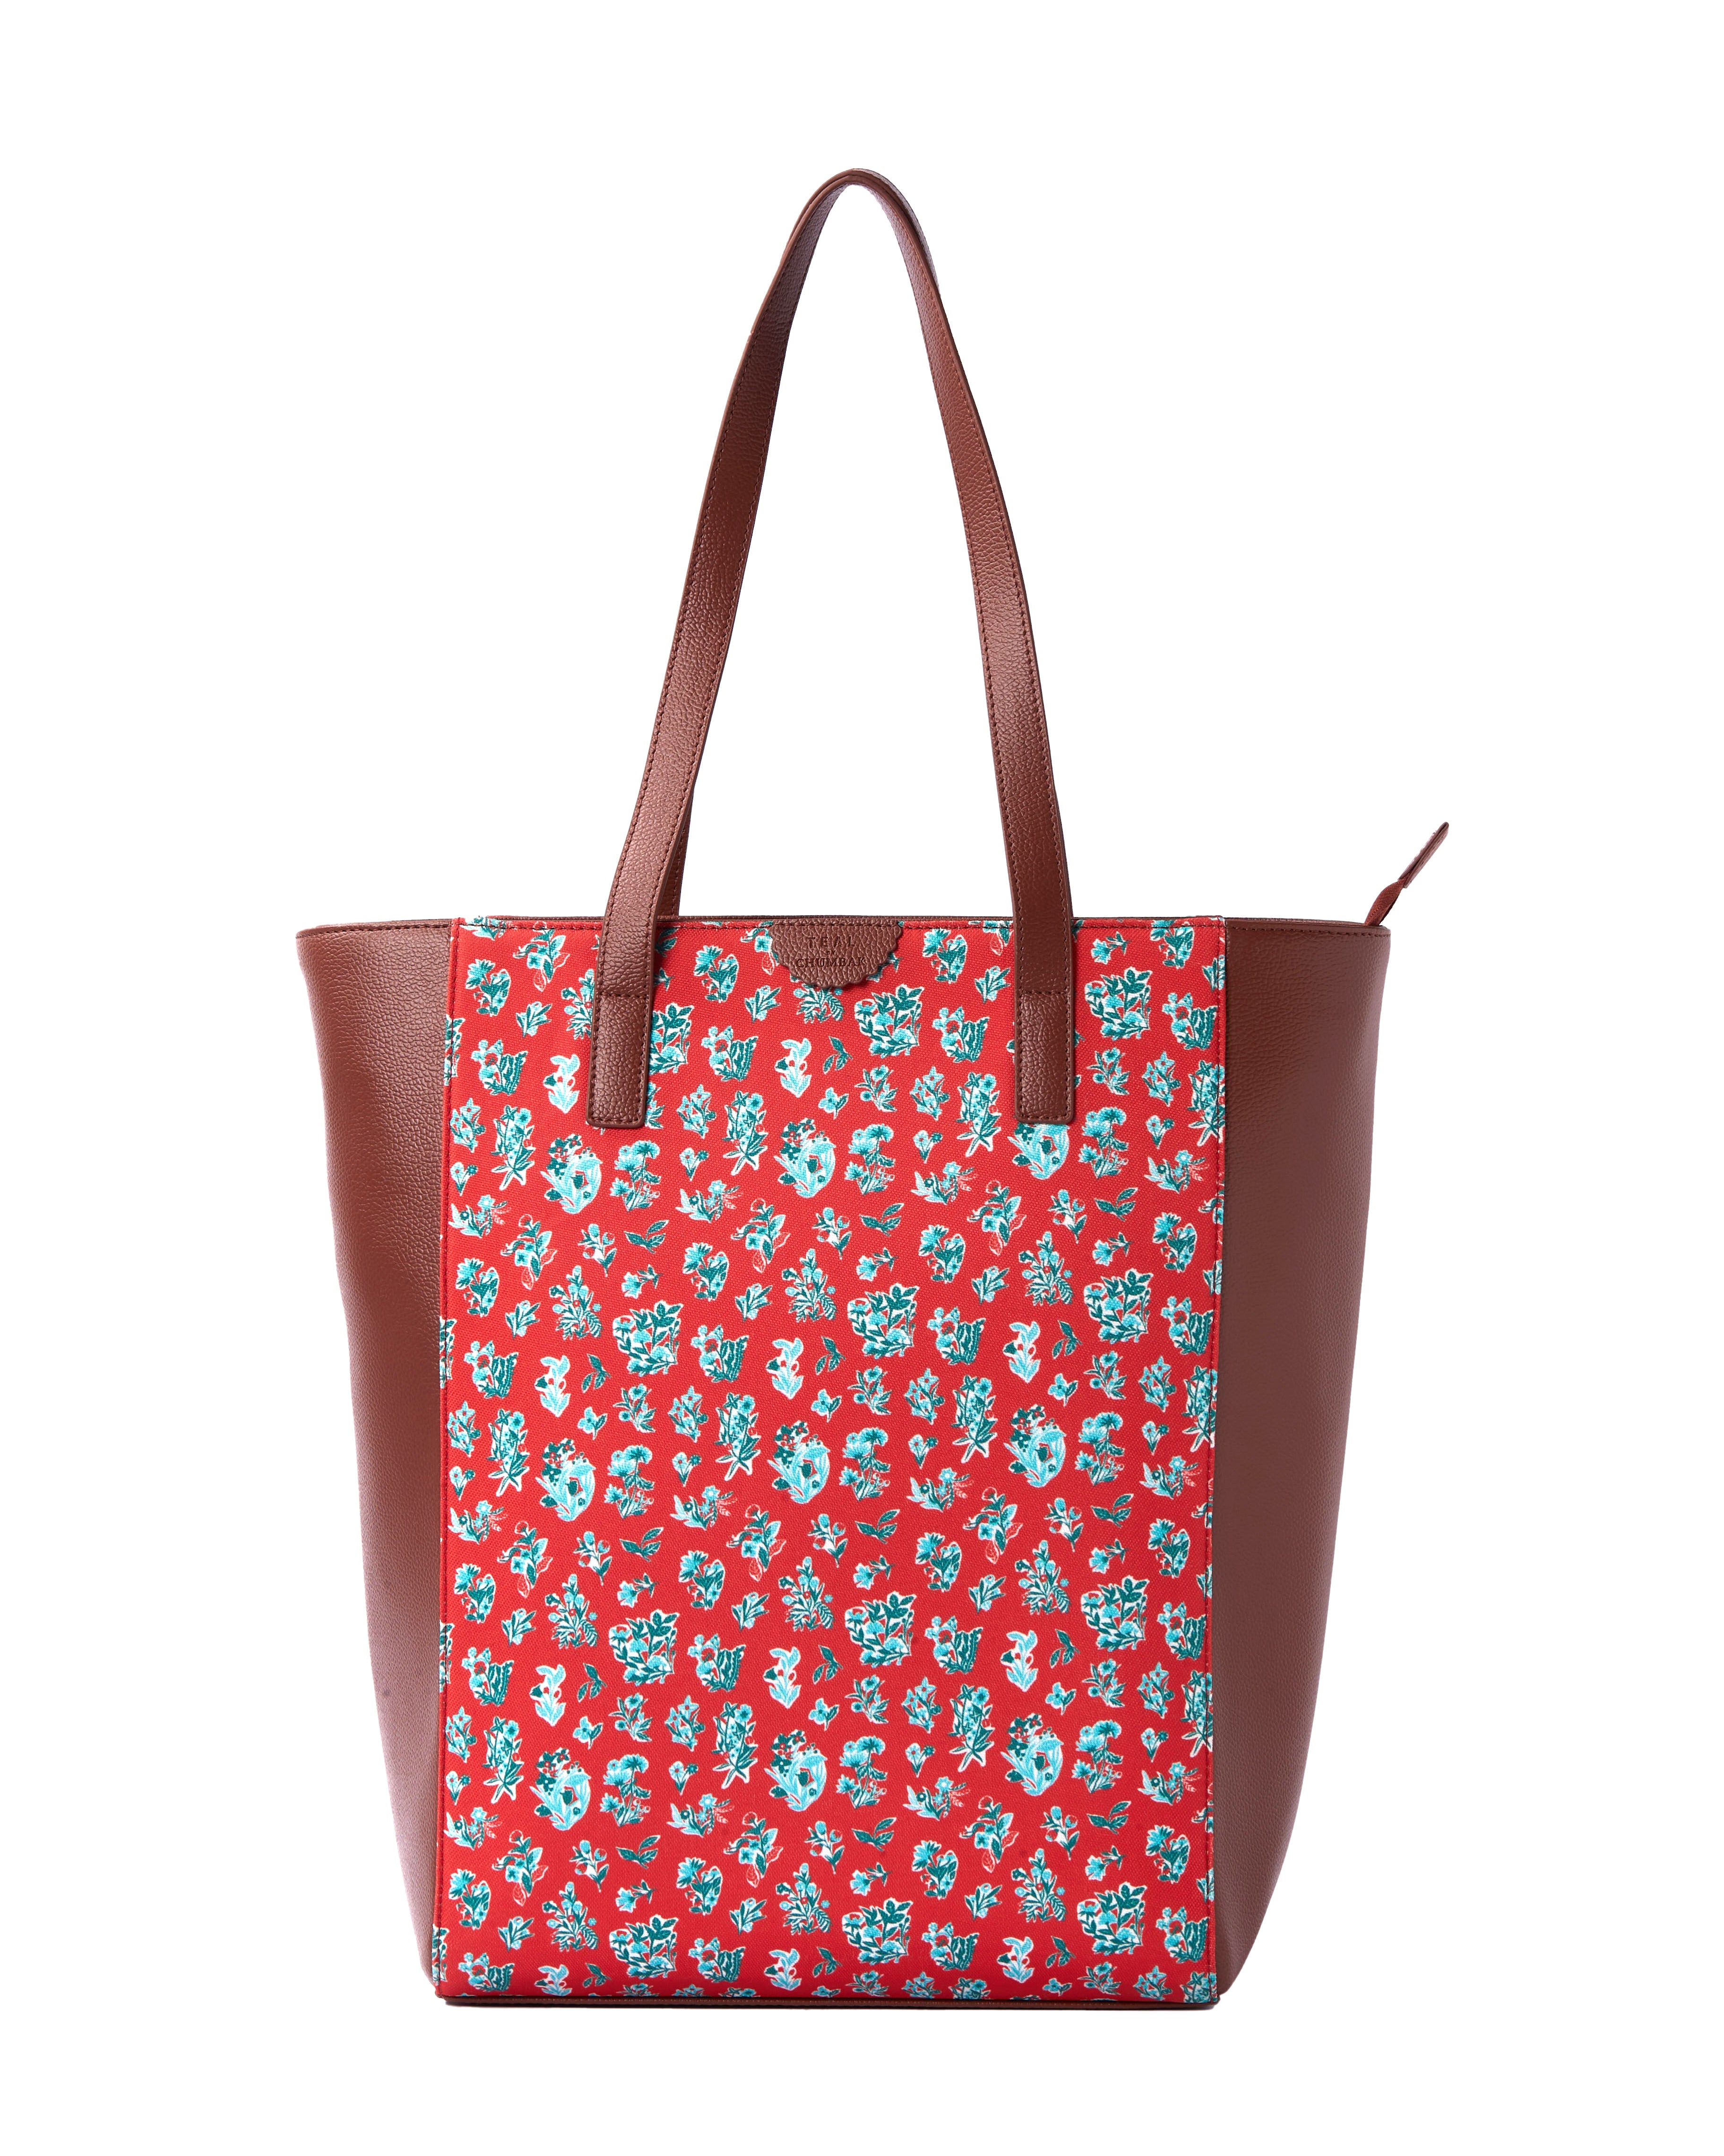 Teal by Chumbak Wildflower Shopper Tote